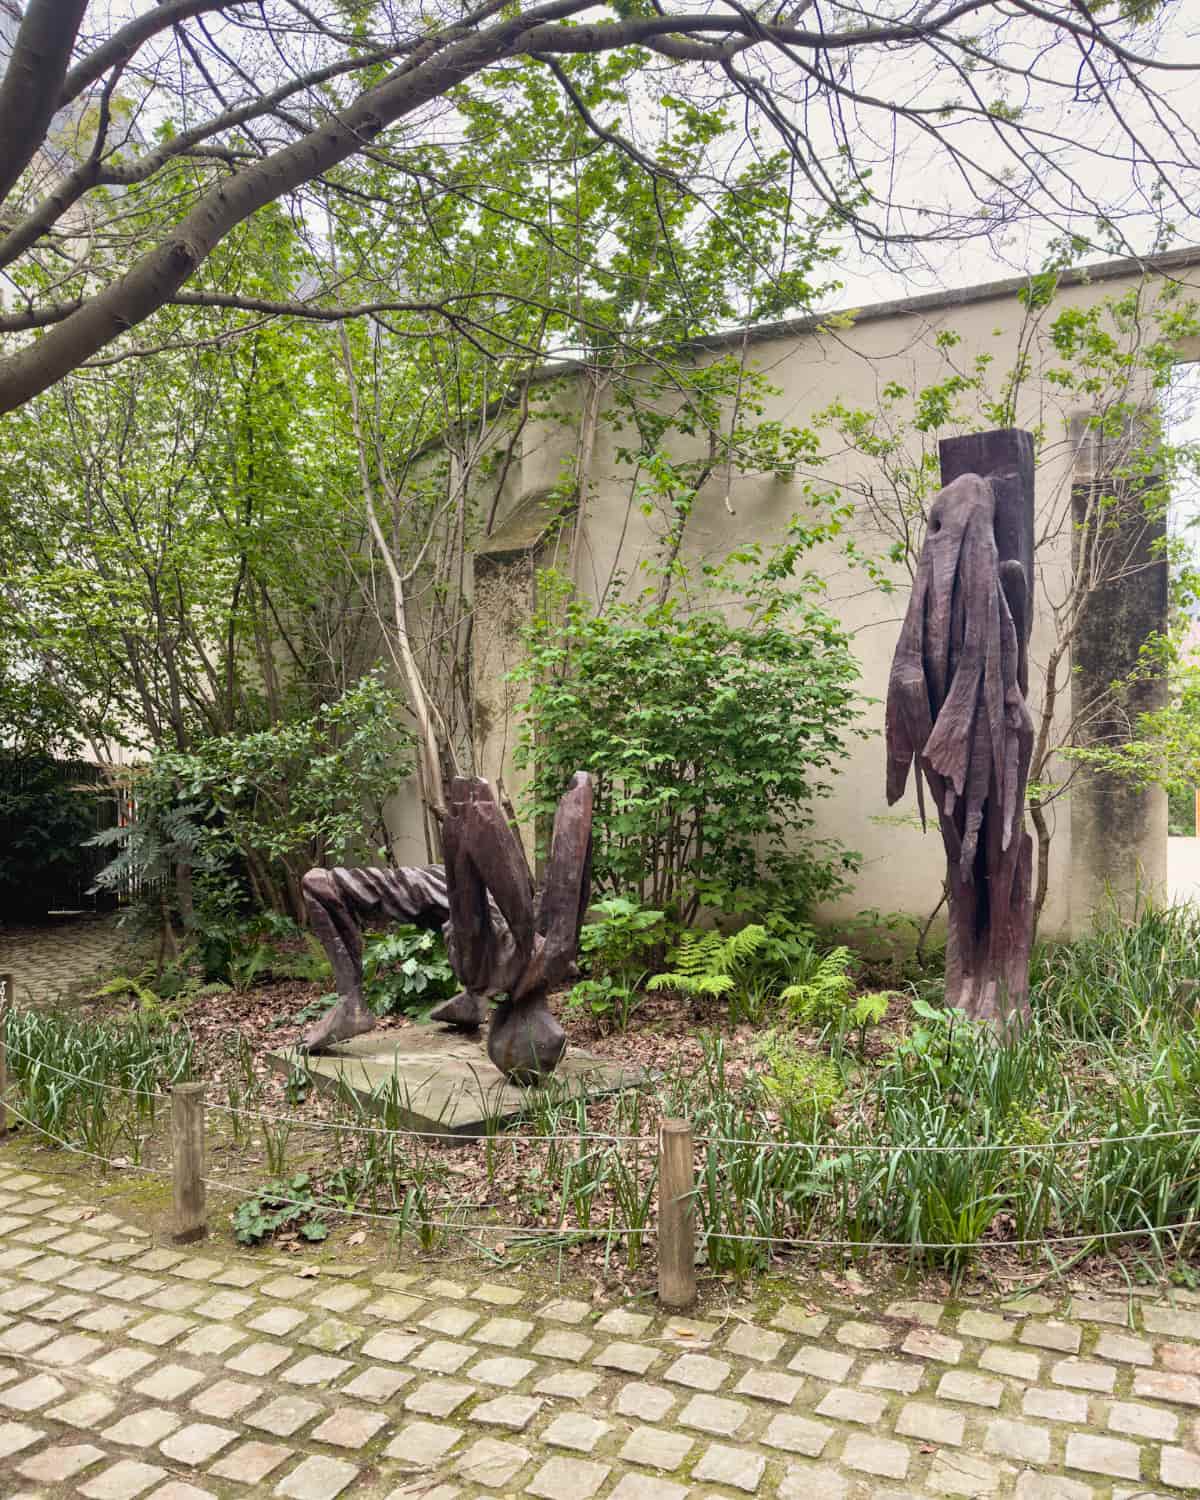 Sculptures surrounded by trees and plants in Anne Frank garden